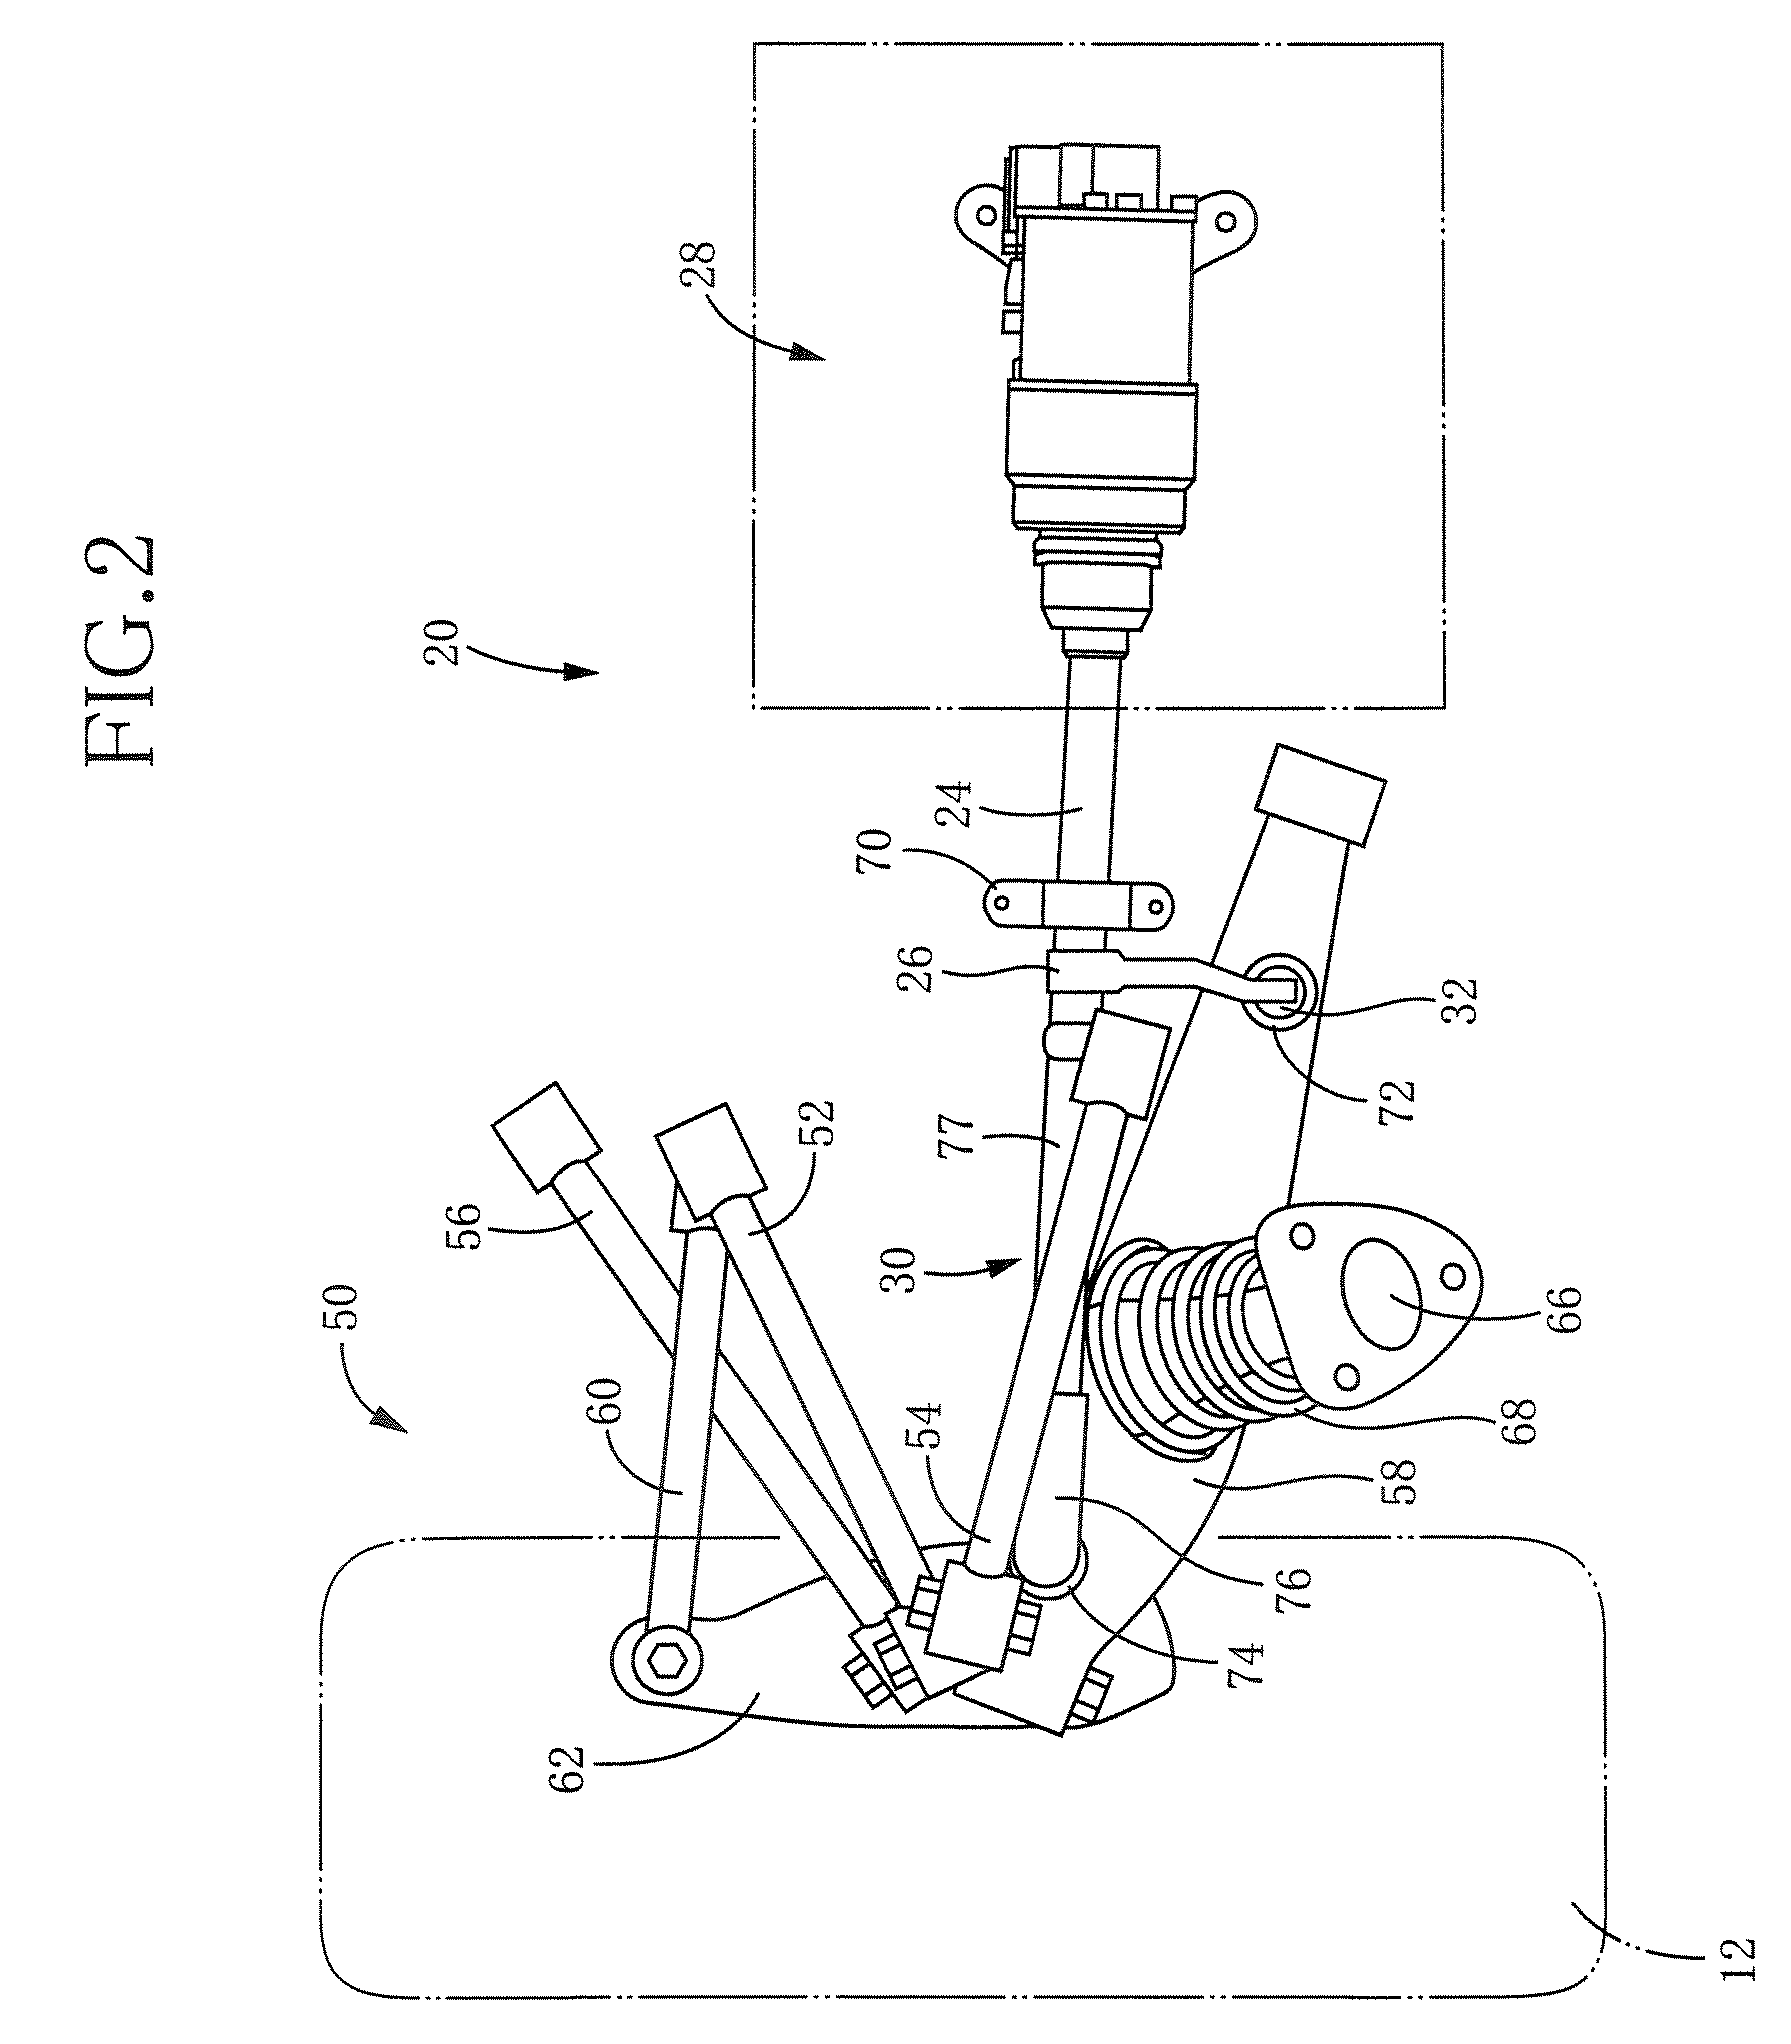 Device for changing distance between wheel and vehicle body, and system including the device